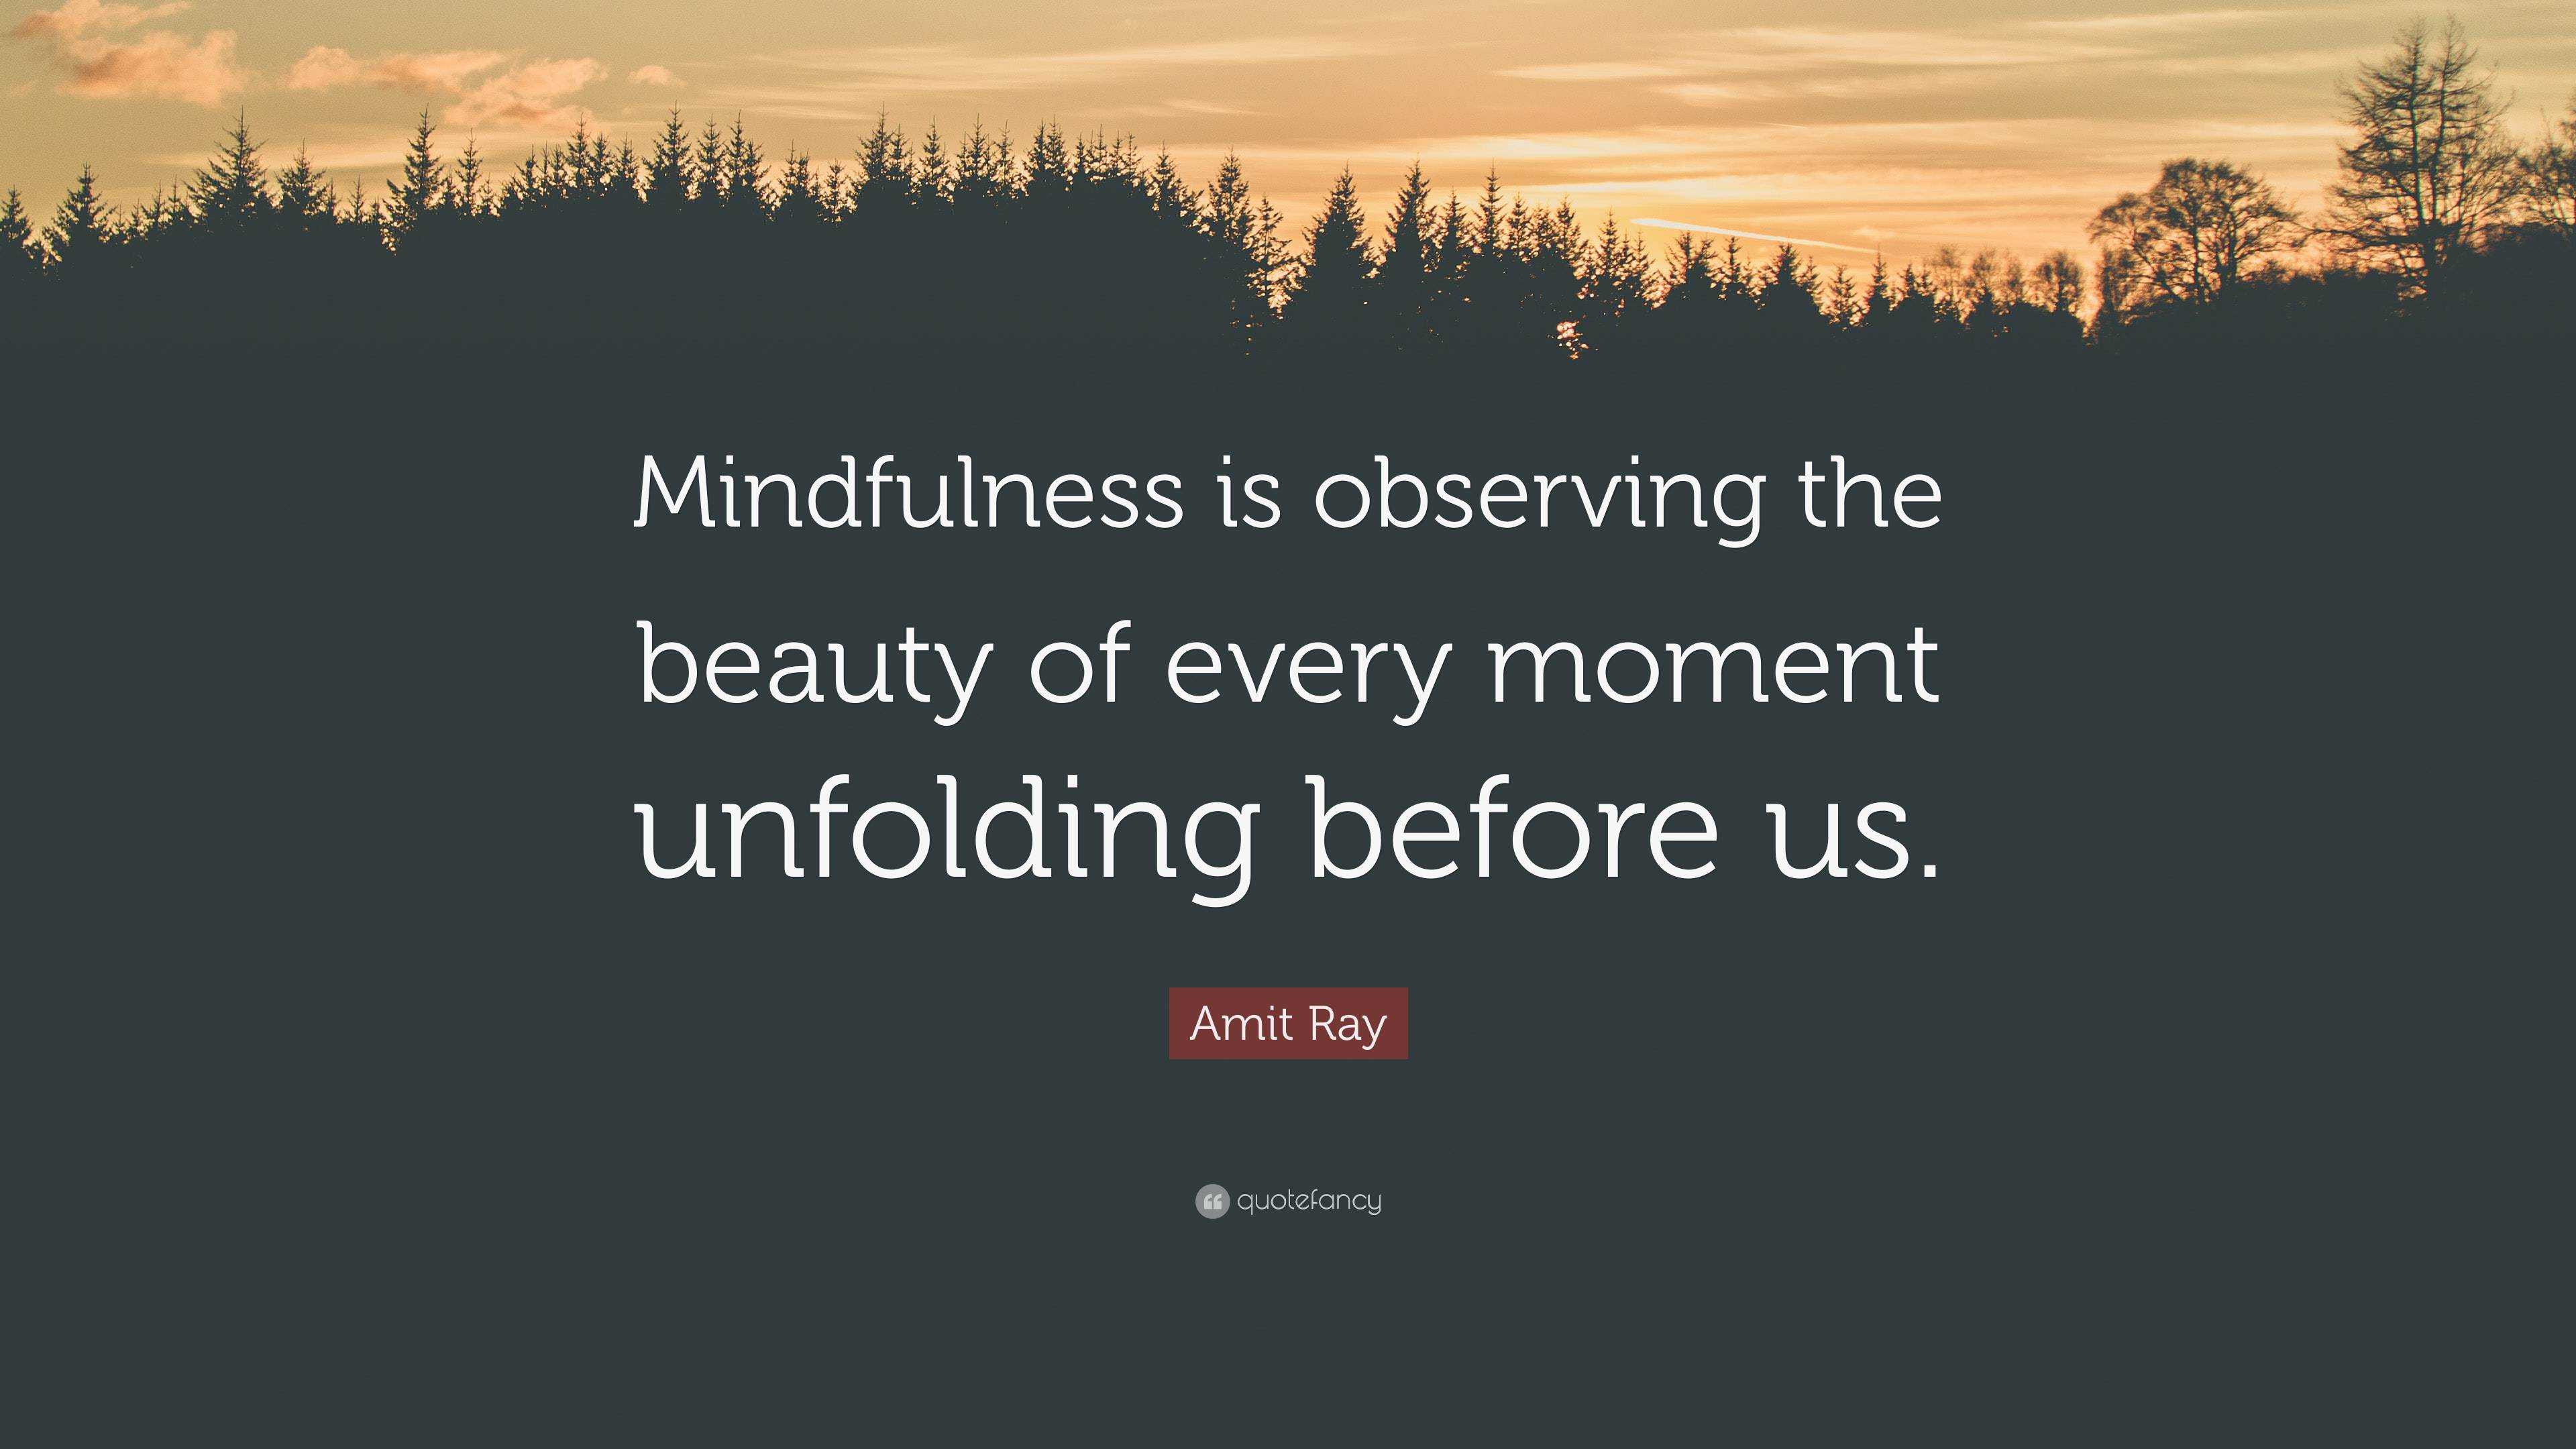 Amit Ray Quote: “Mindfulness is observing the beauty of every moment ...